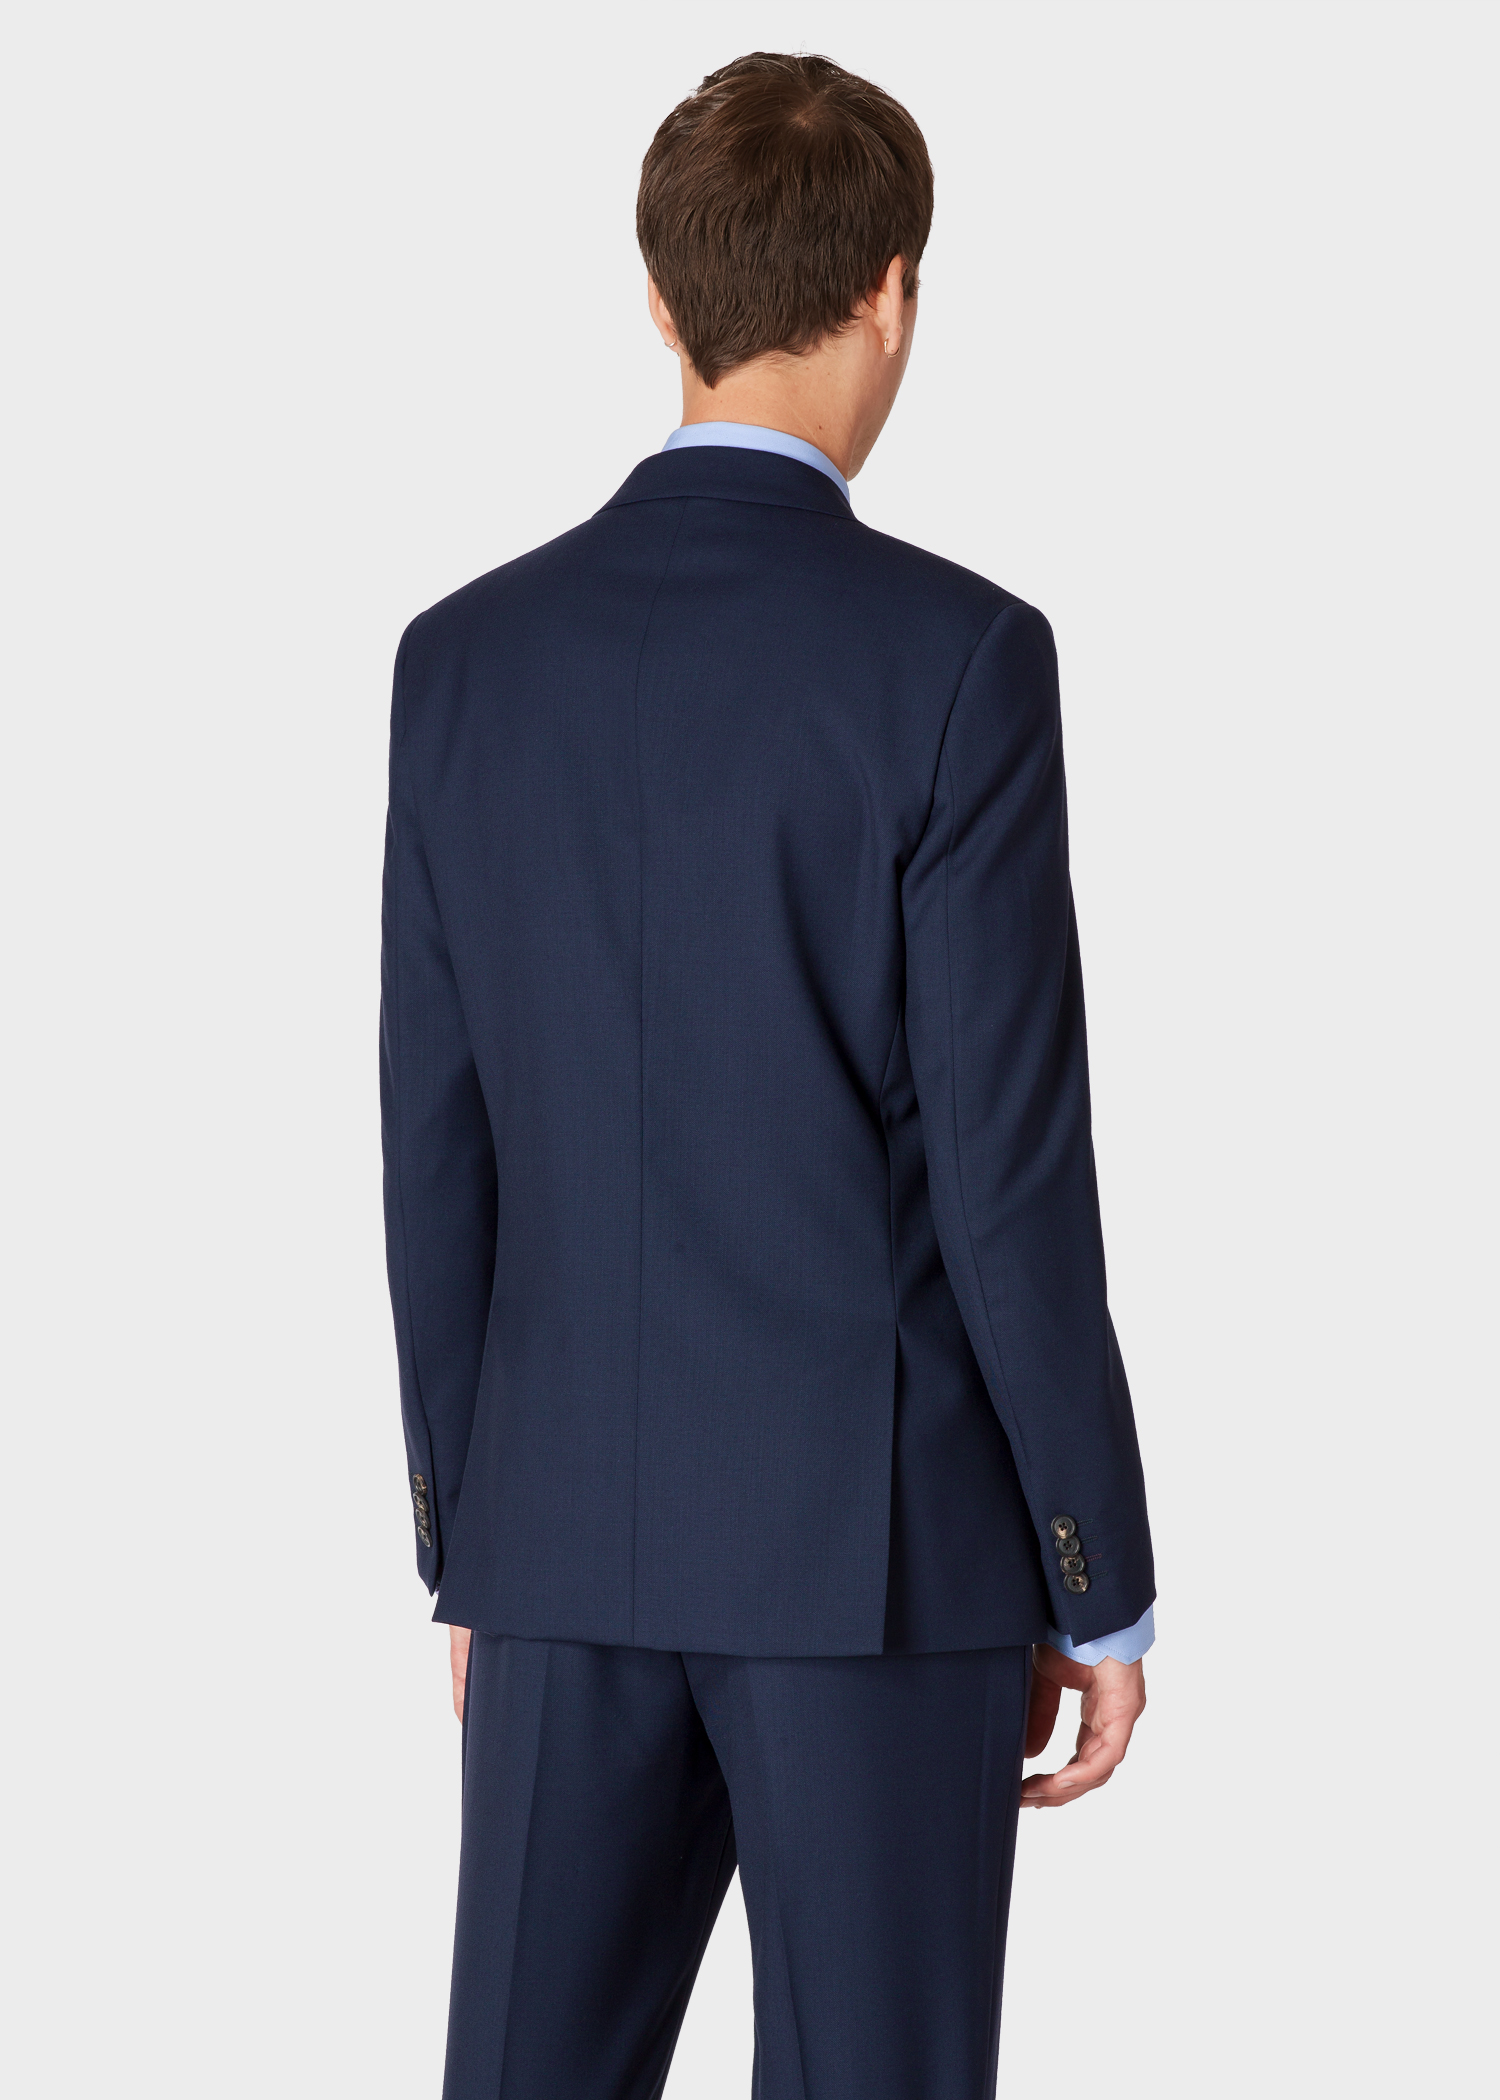 Model back blazer view - The Piccadilly - Men's Tailored-Fit Navy Blue Wool Suit 'A Suit To Travel In'